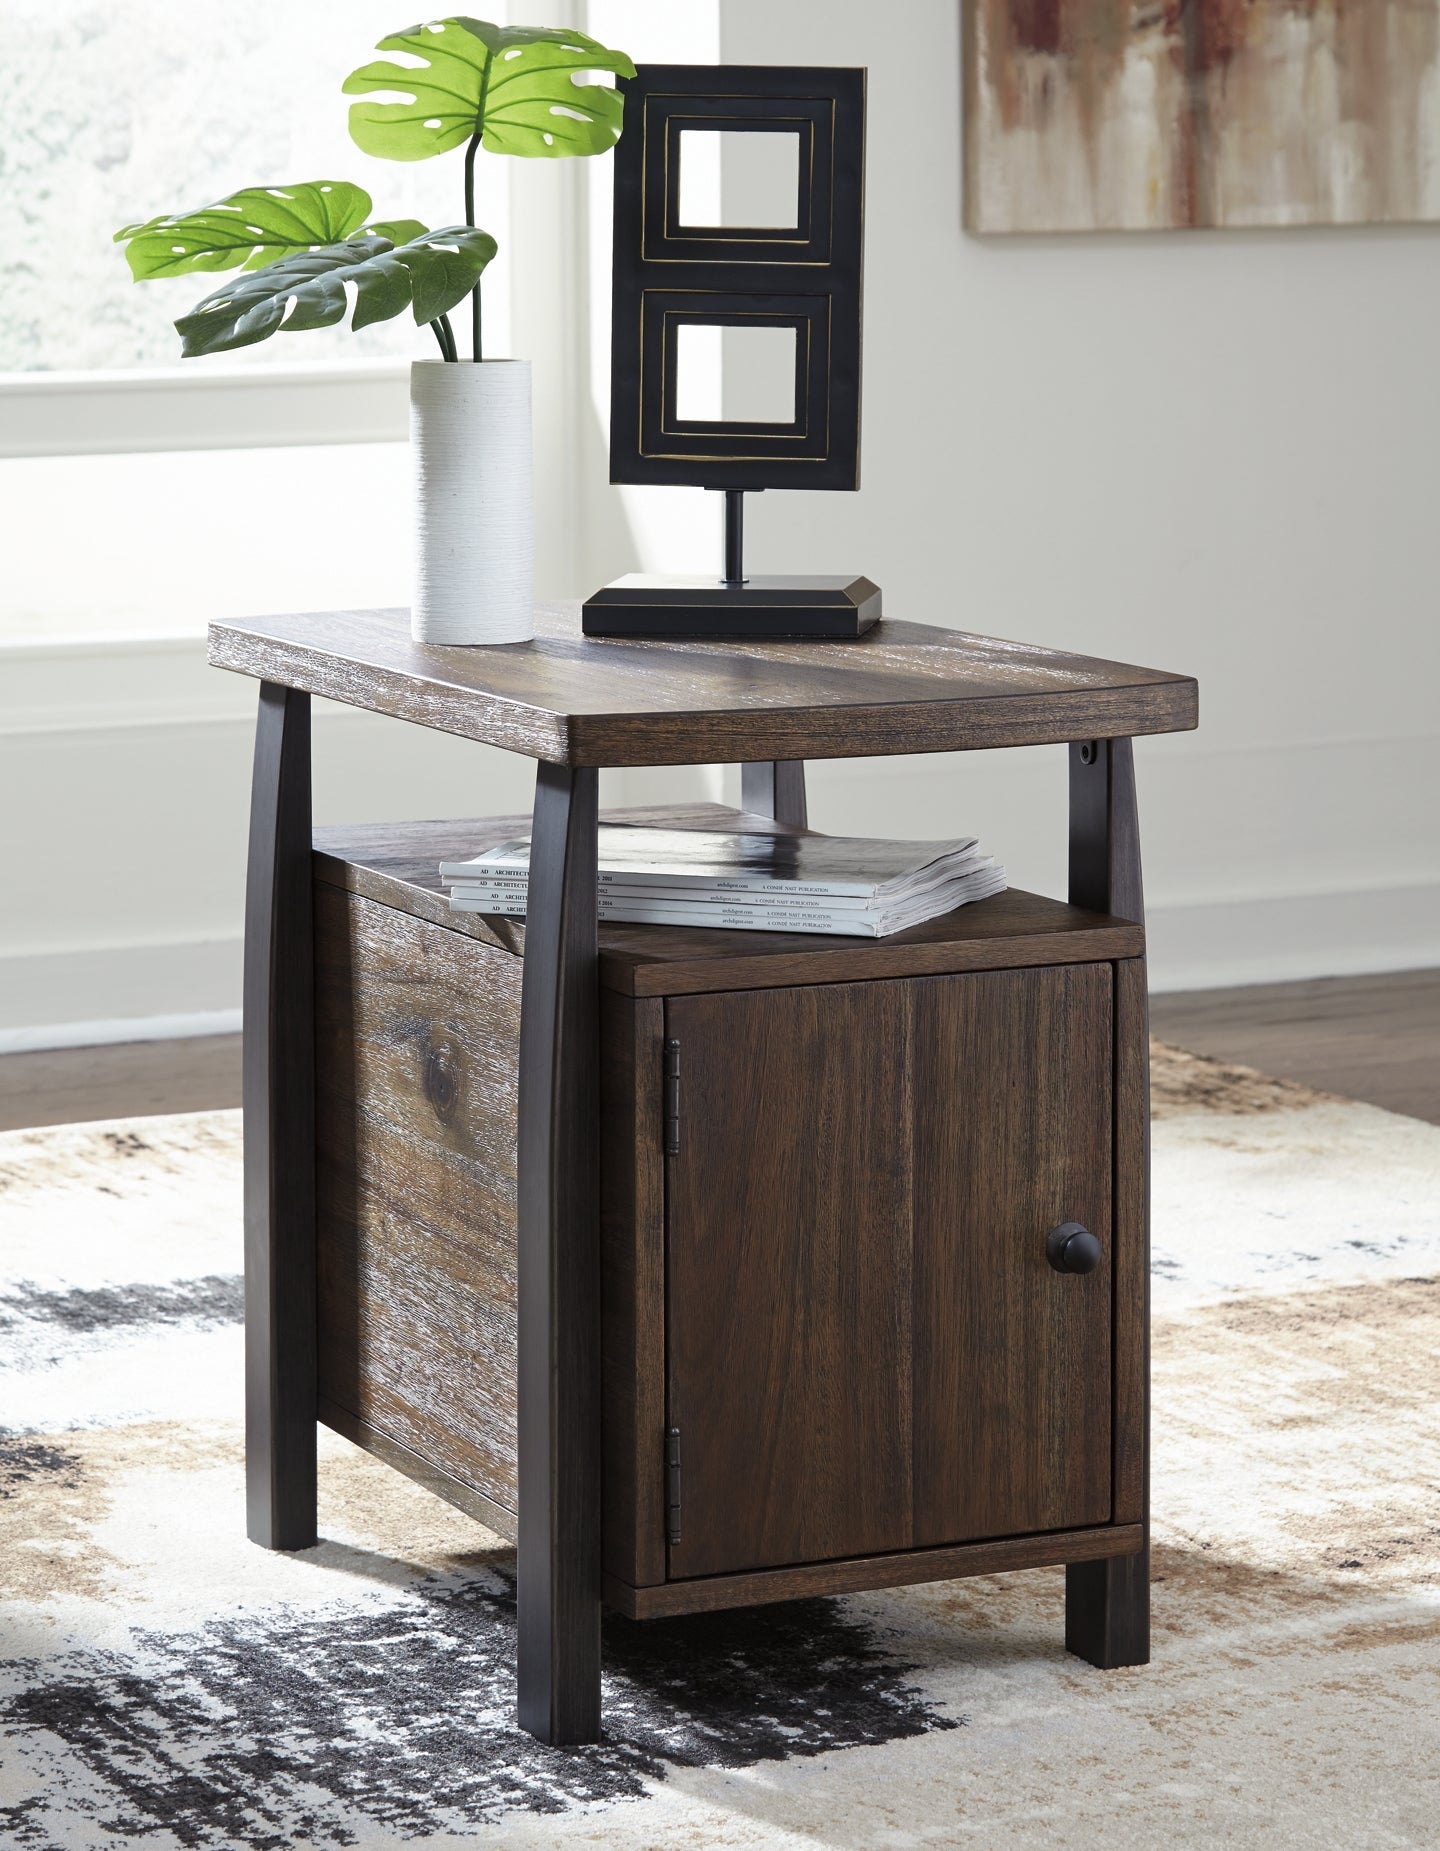 Vailbry 2 End Tables at Cloud 9 Mattress & Furniture furniture, home furnishing, home decor